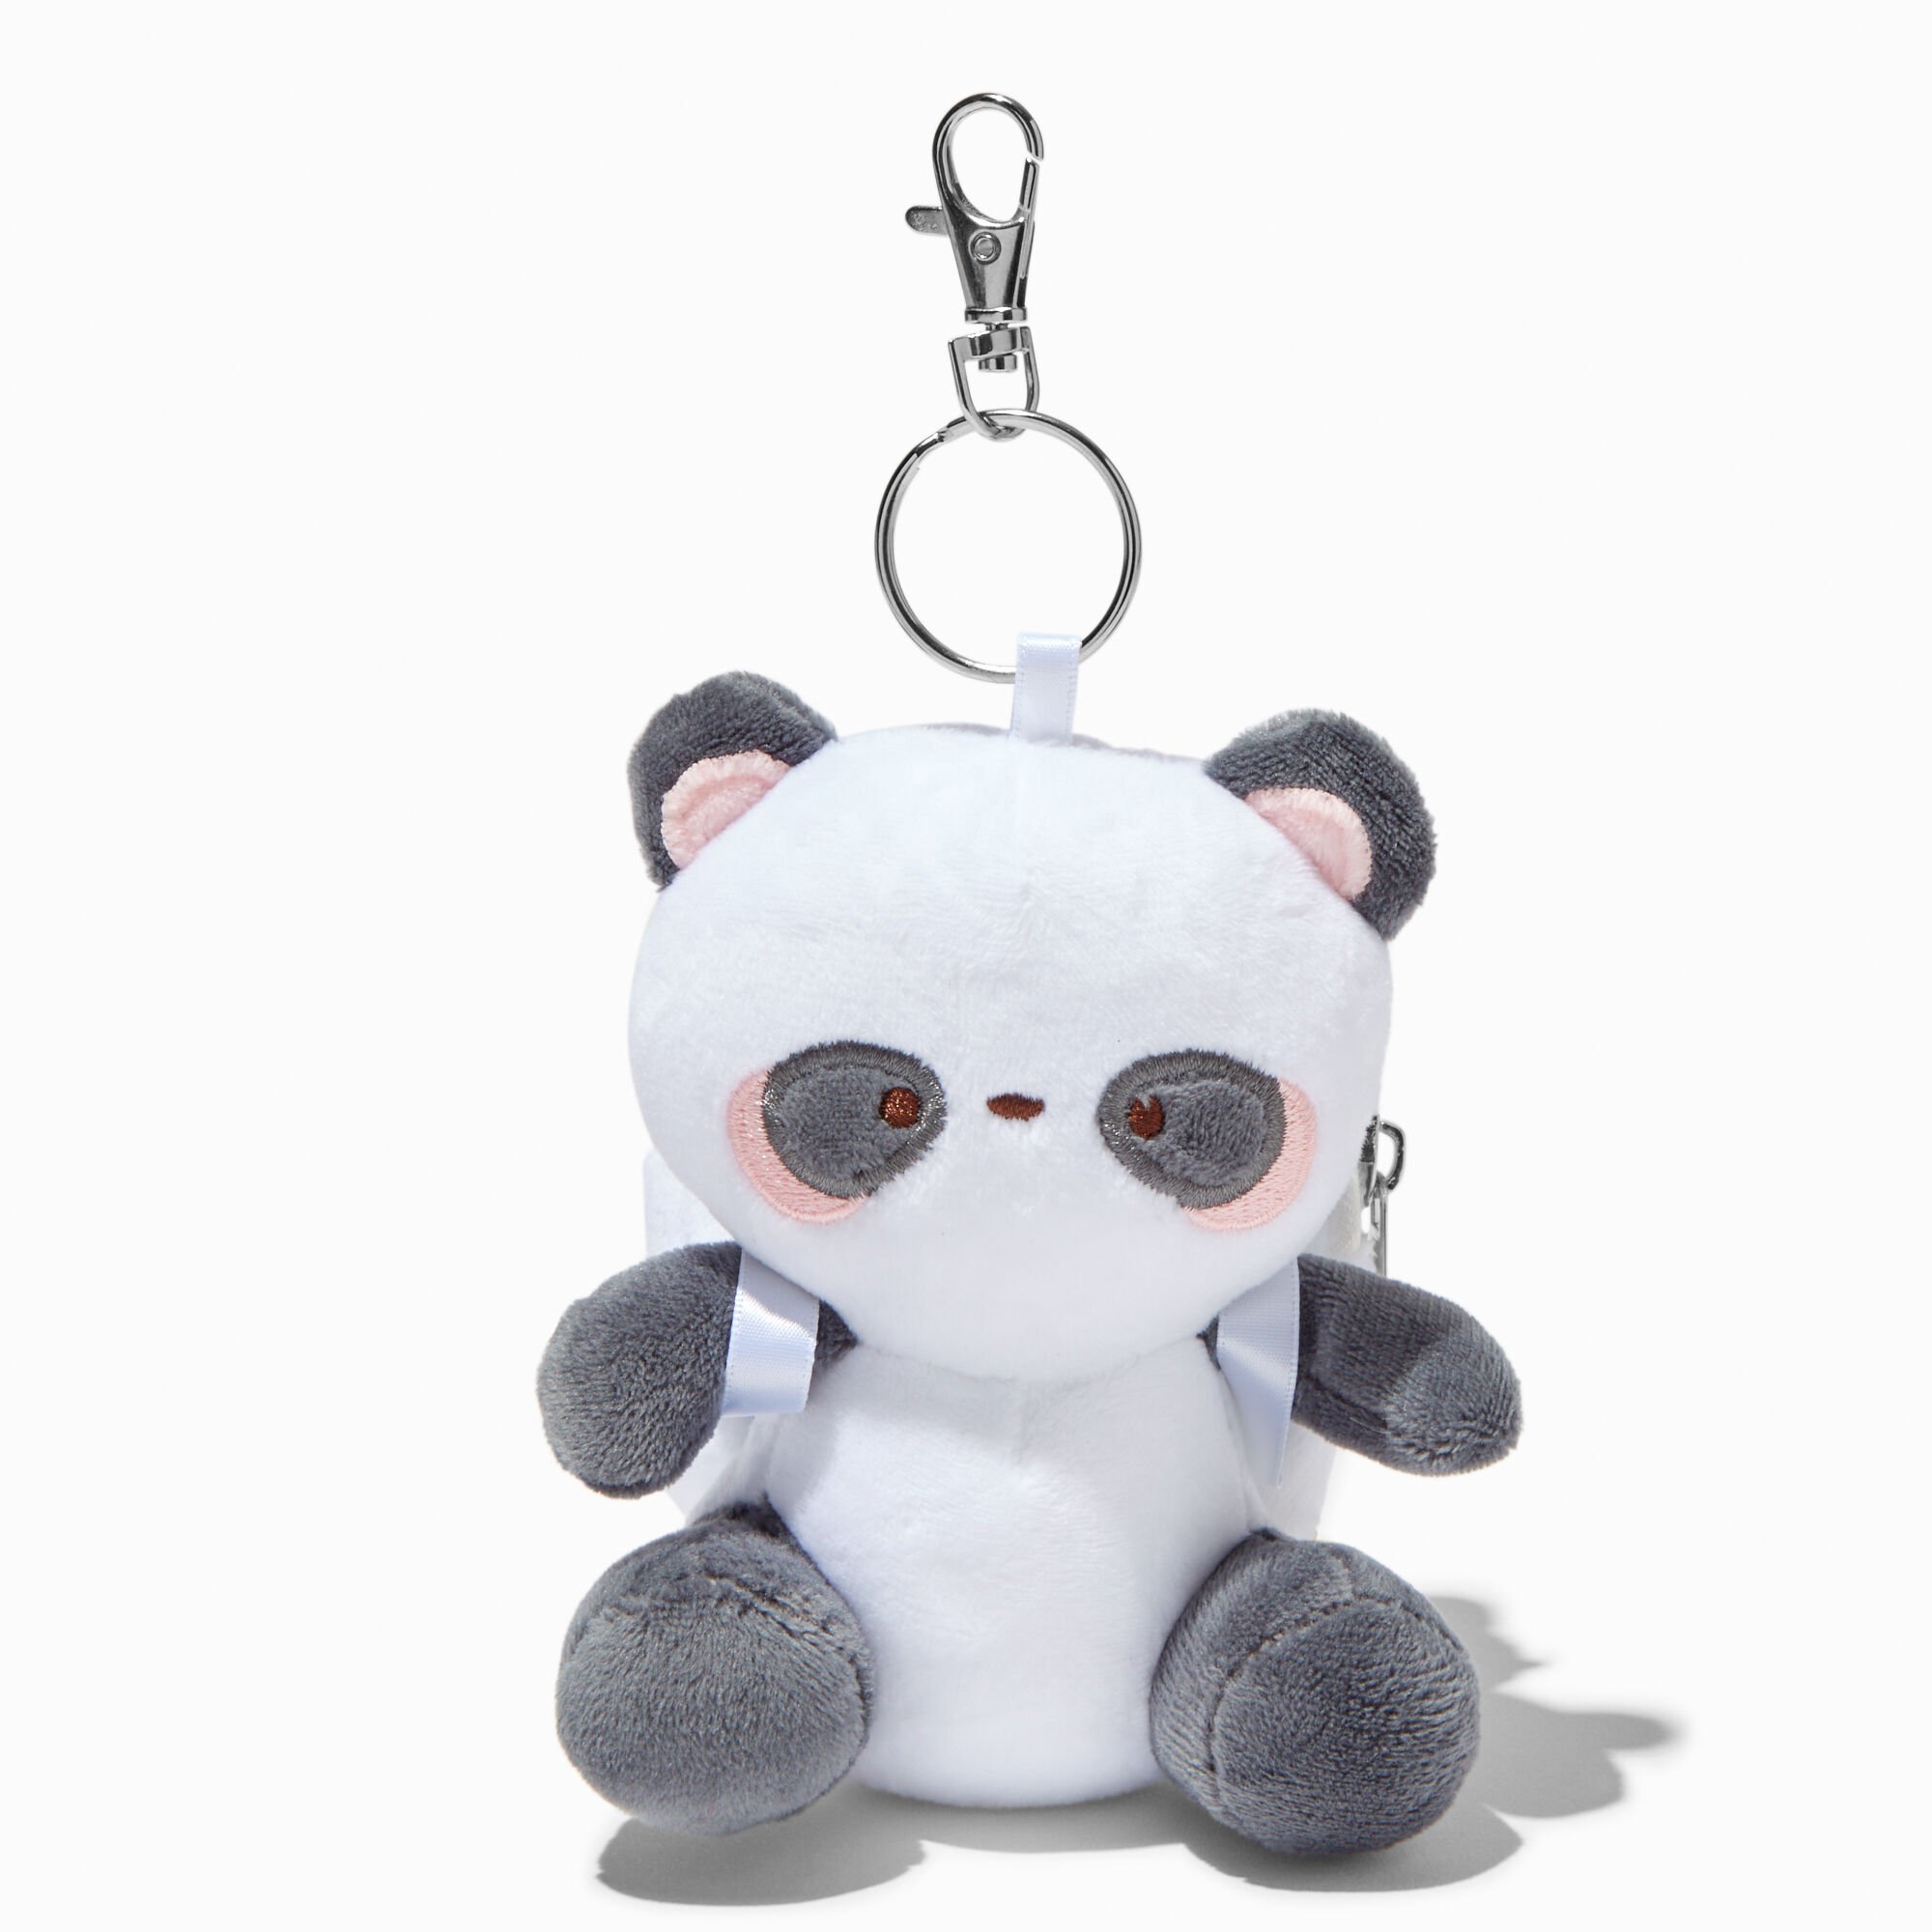 View Claires Panda Furry Mini Backpack Keyring information